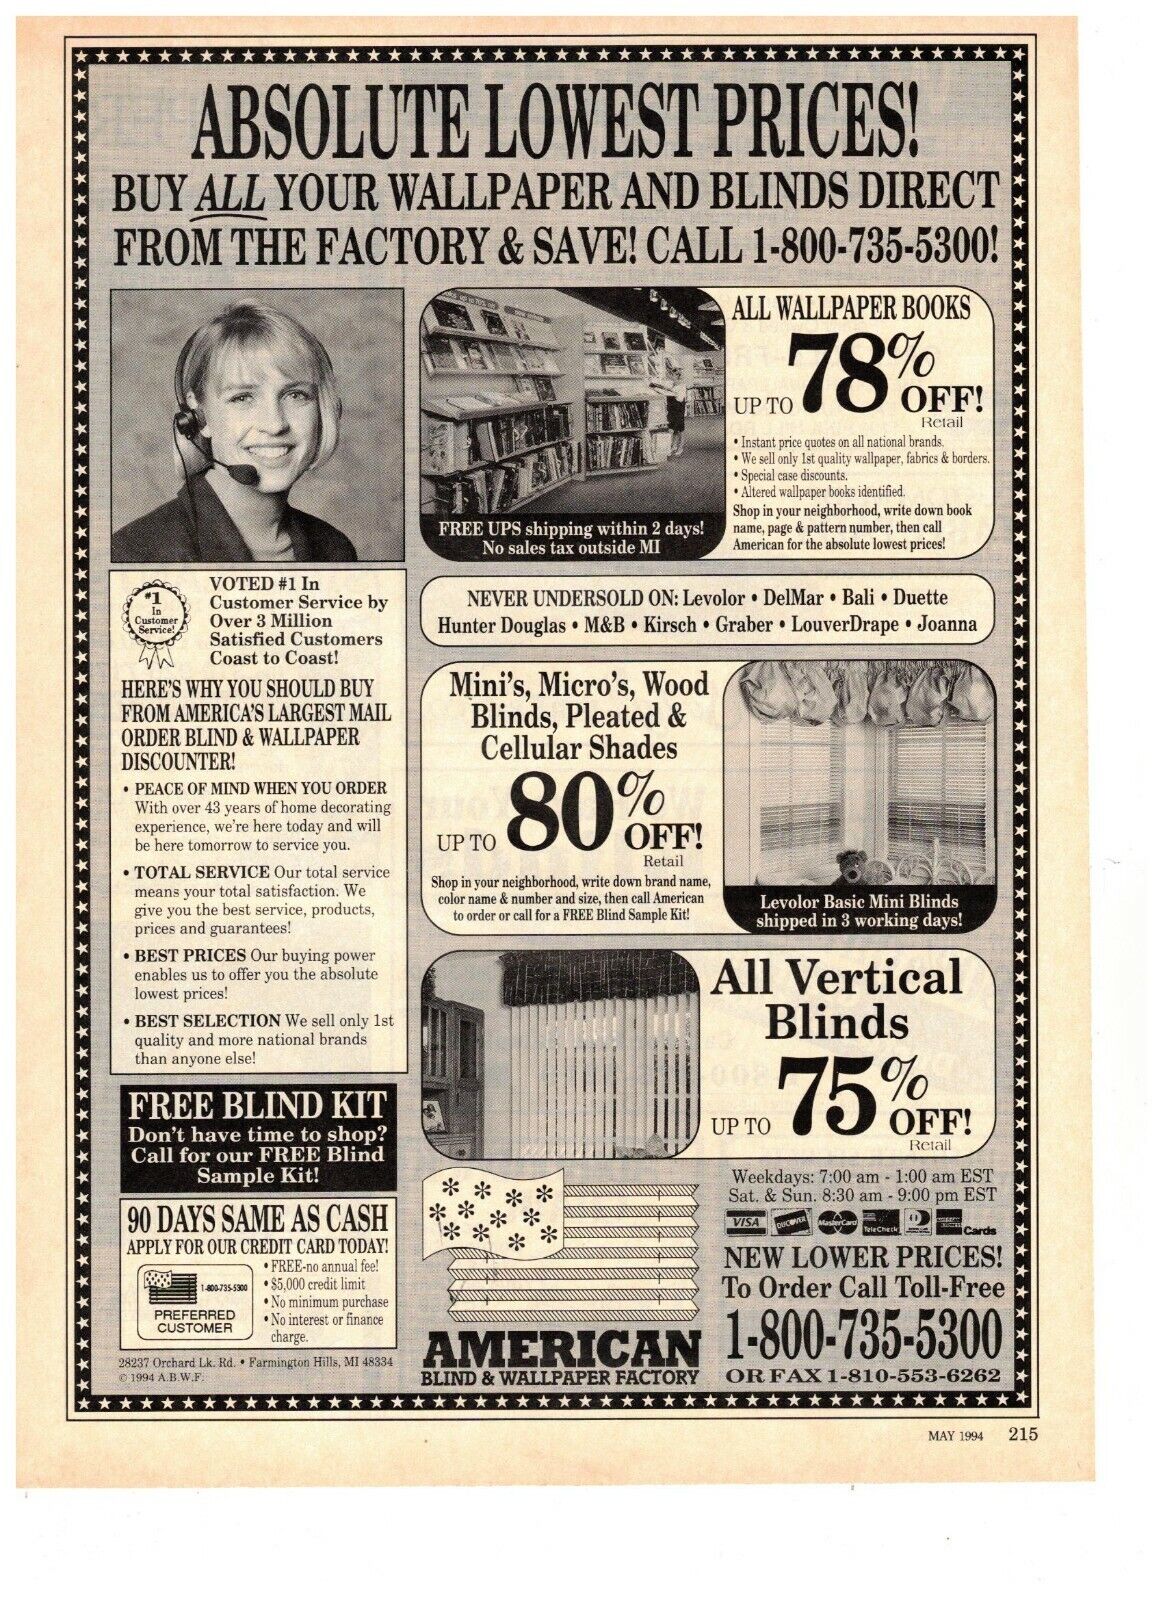 American blind and wallpaper factory absolute lowest vintage print ad